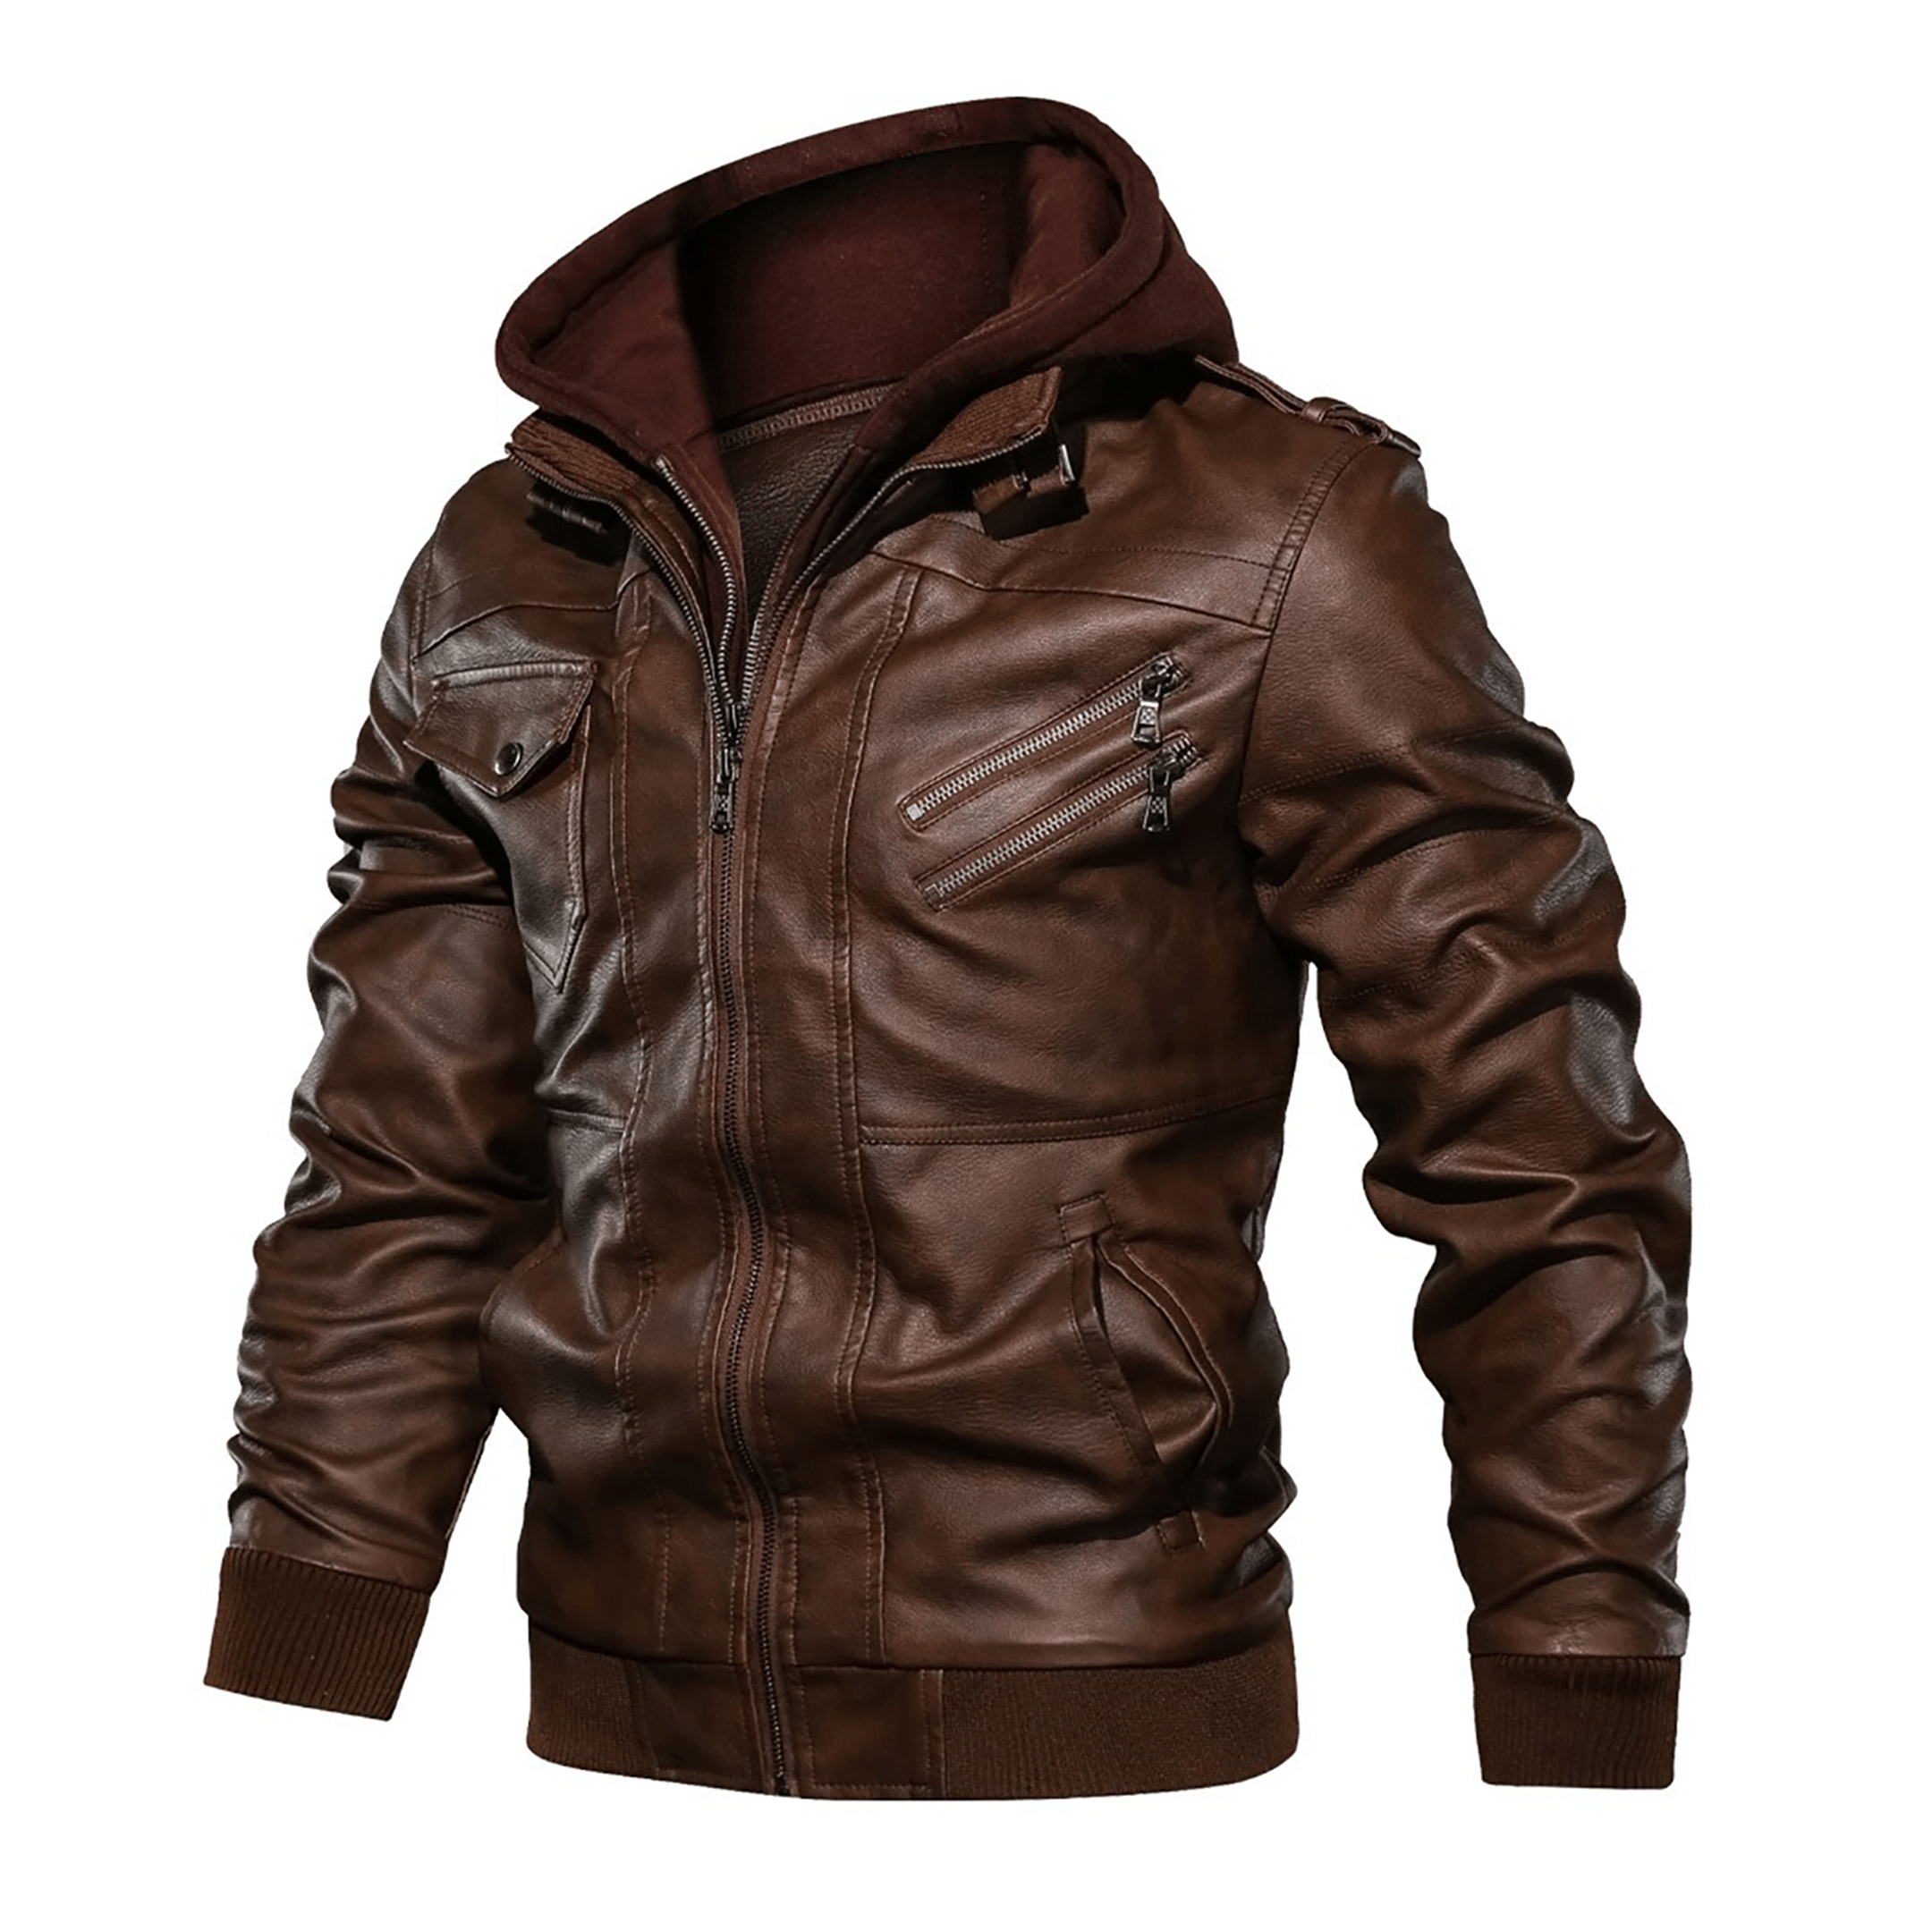 Top leather jackets and latest products 247